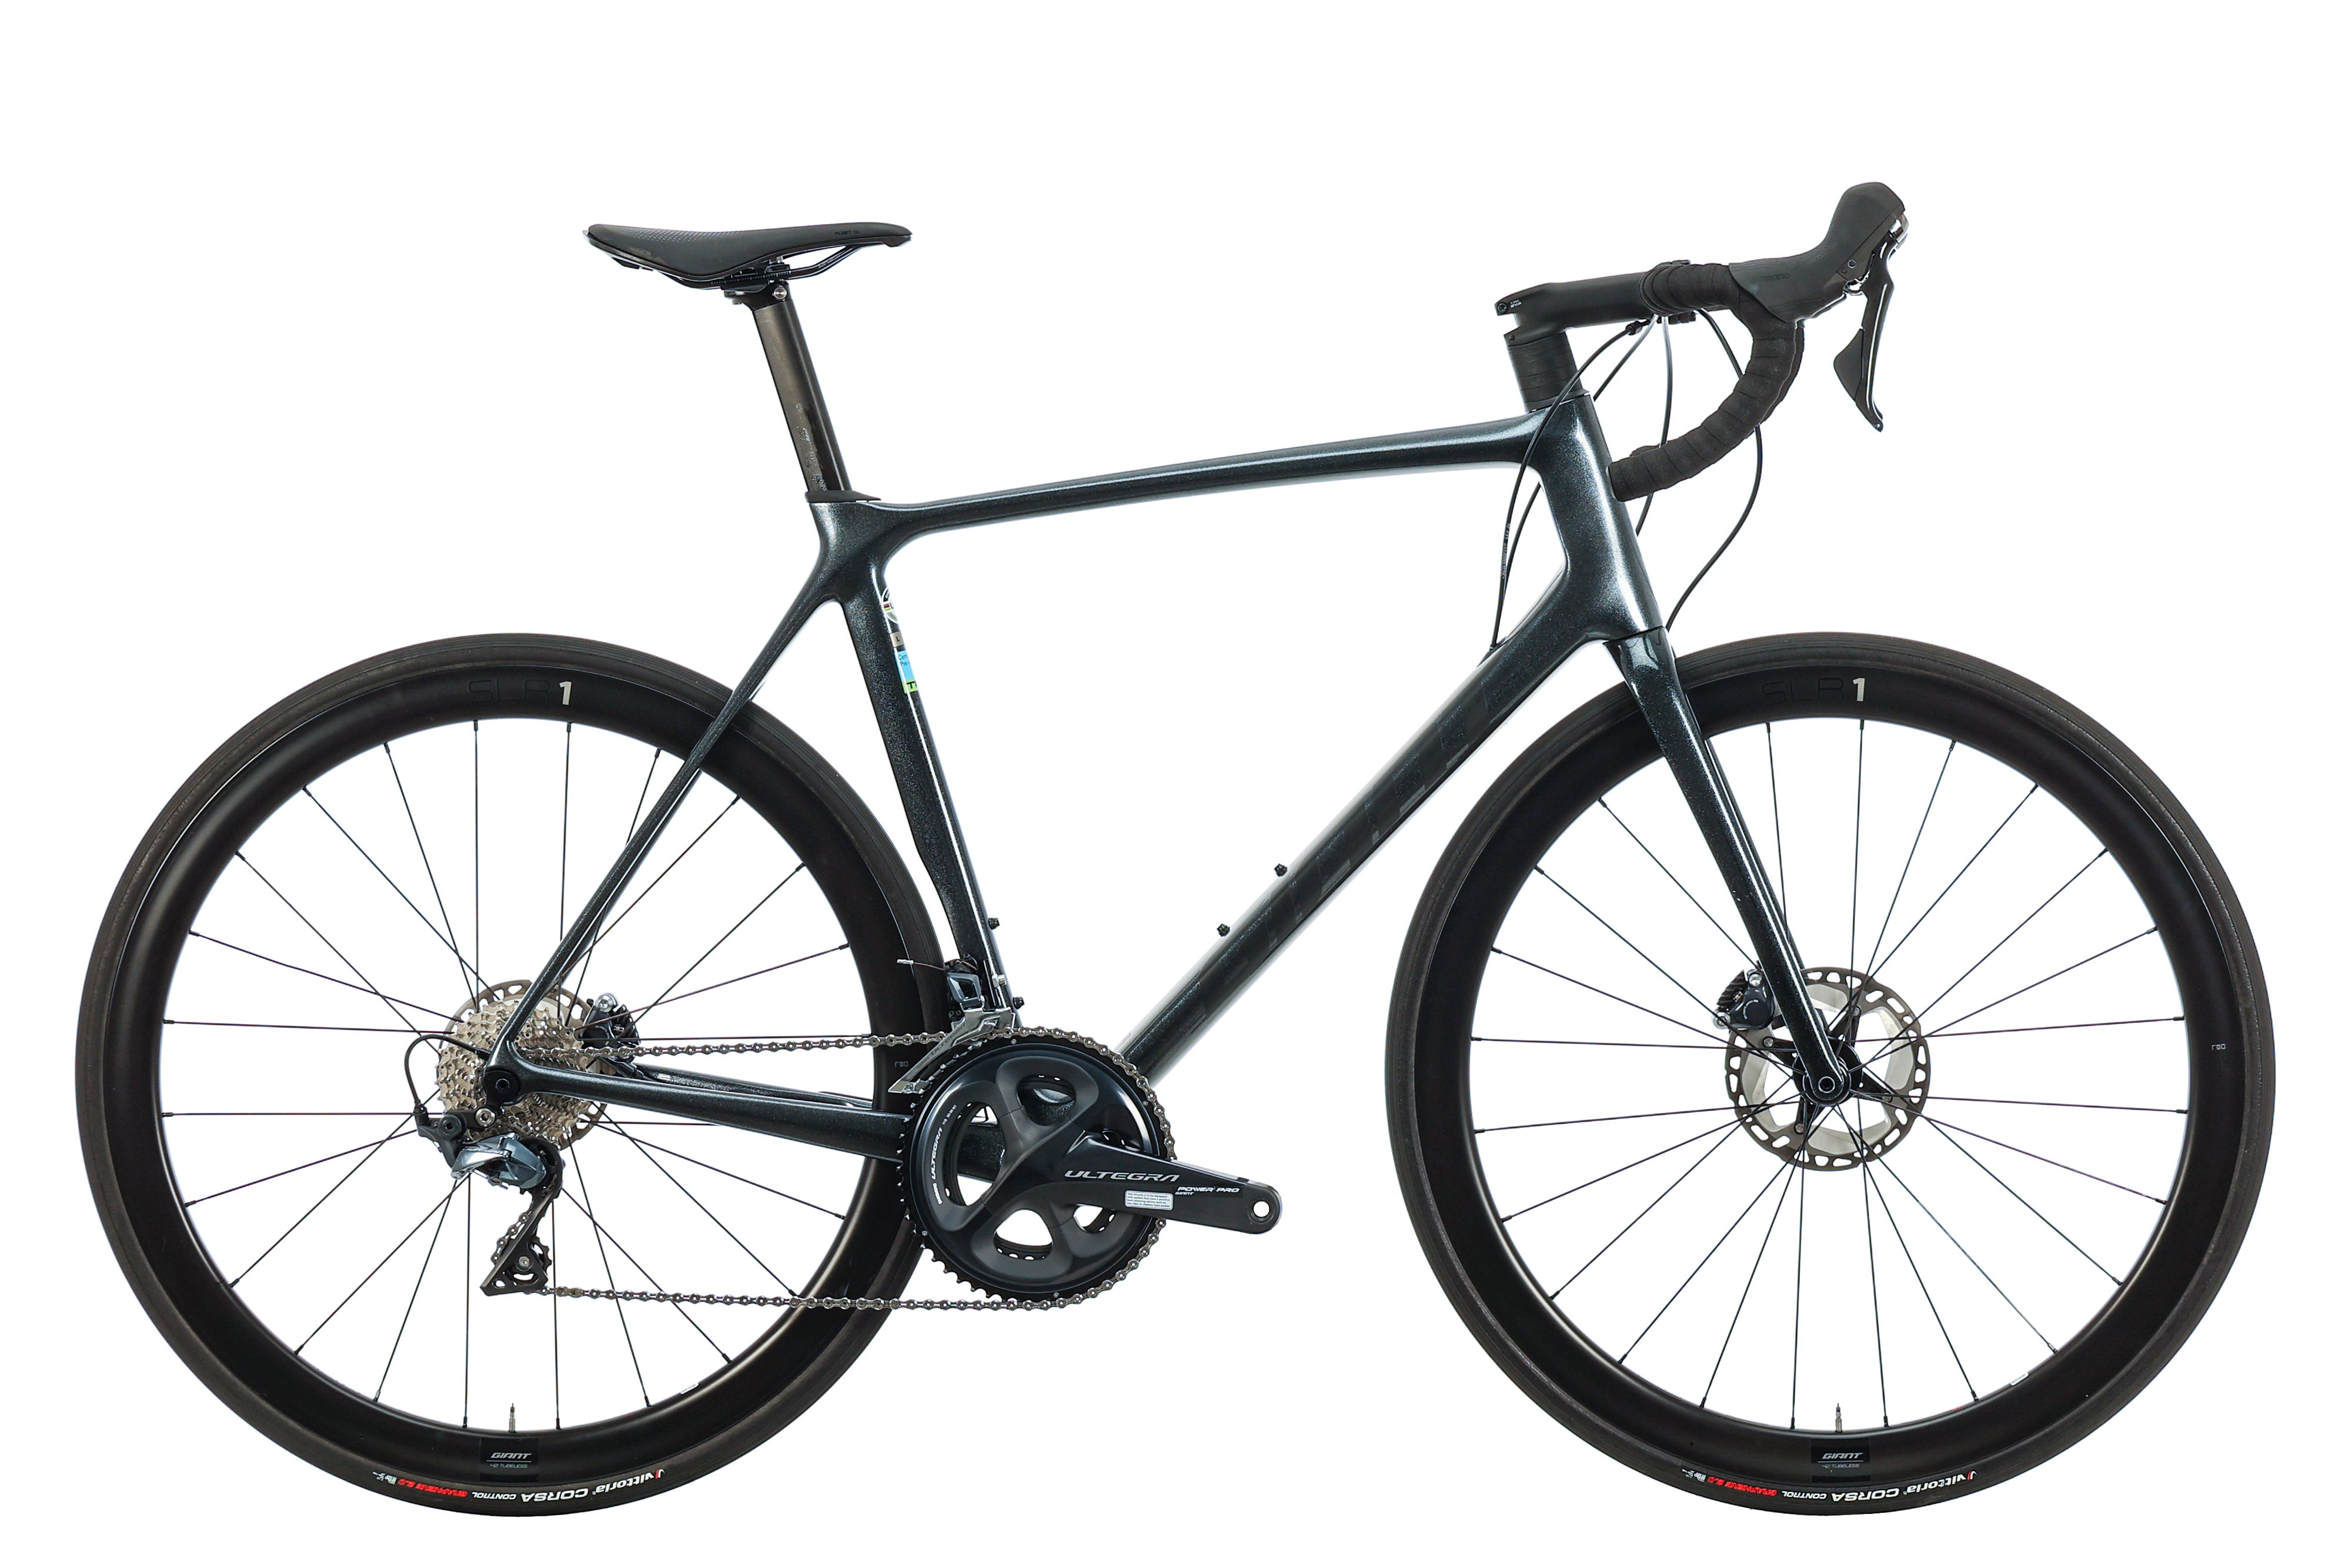 New and Used Giant Road Bikes For Sale The Pros Closet